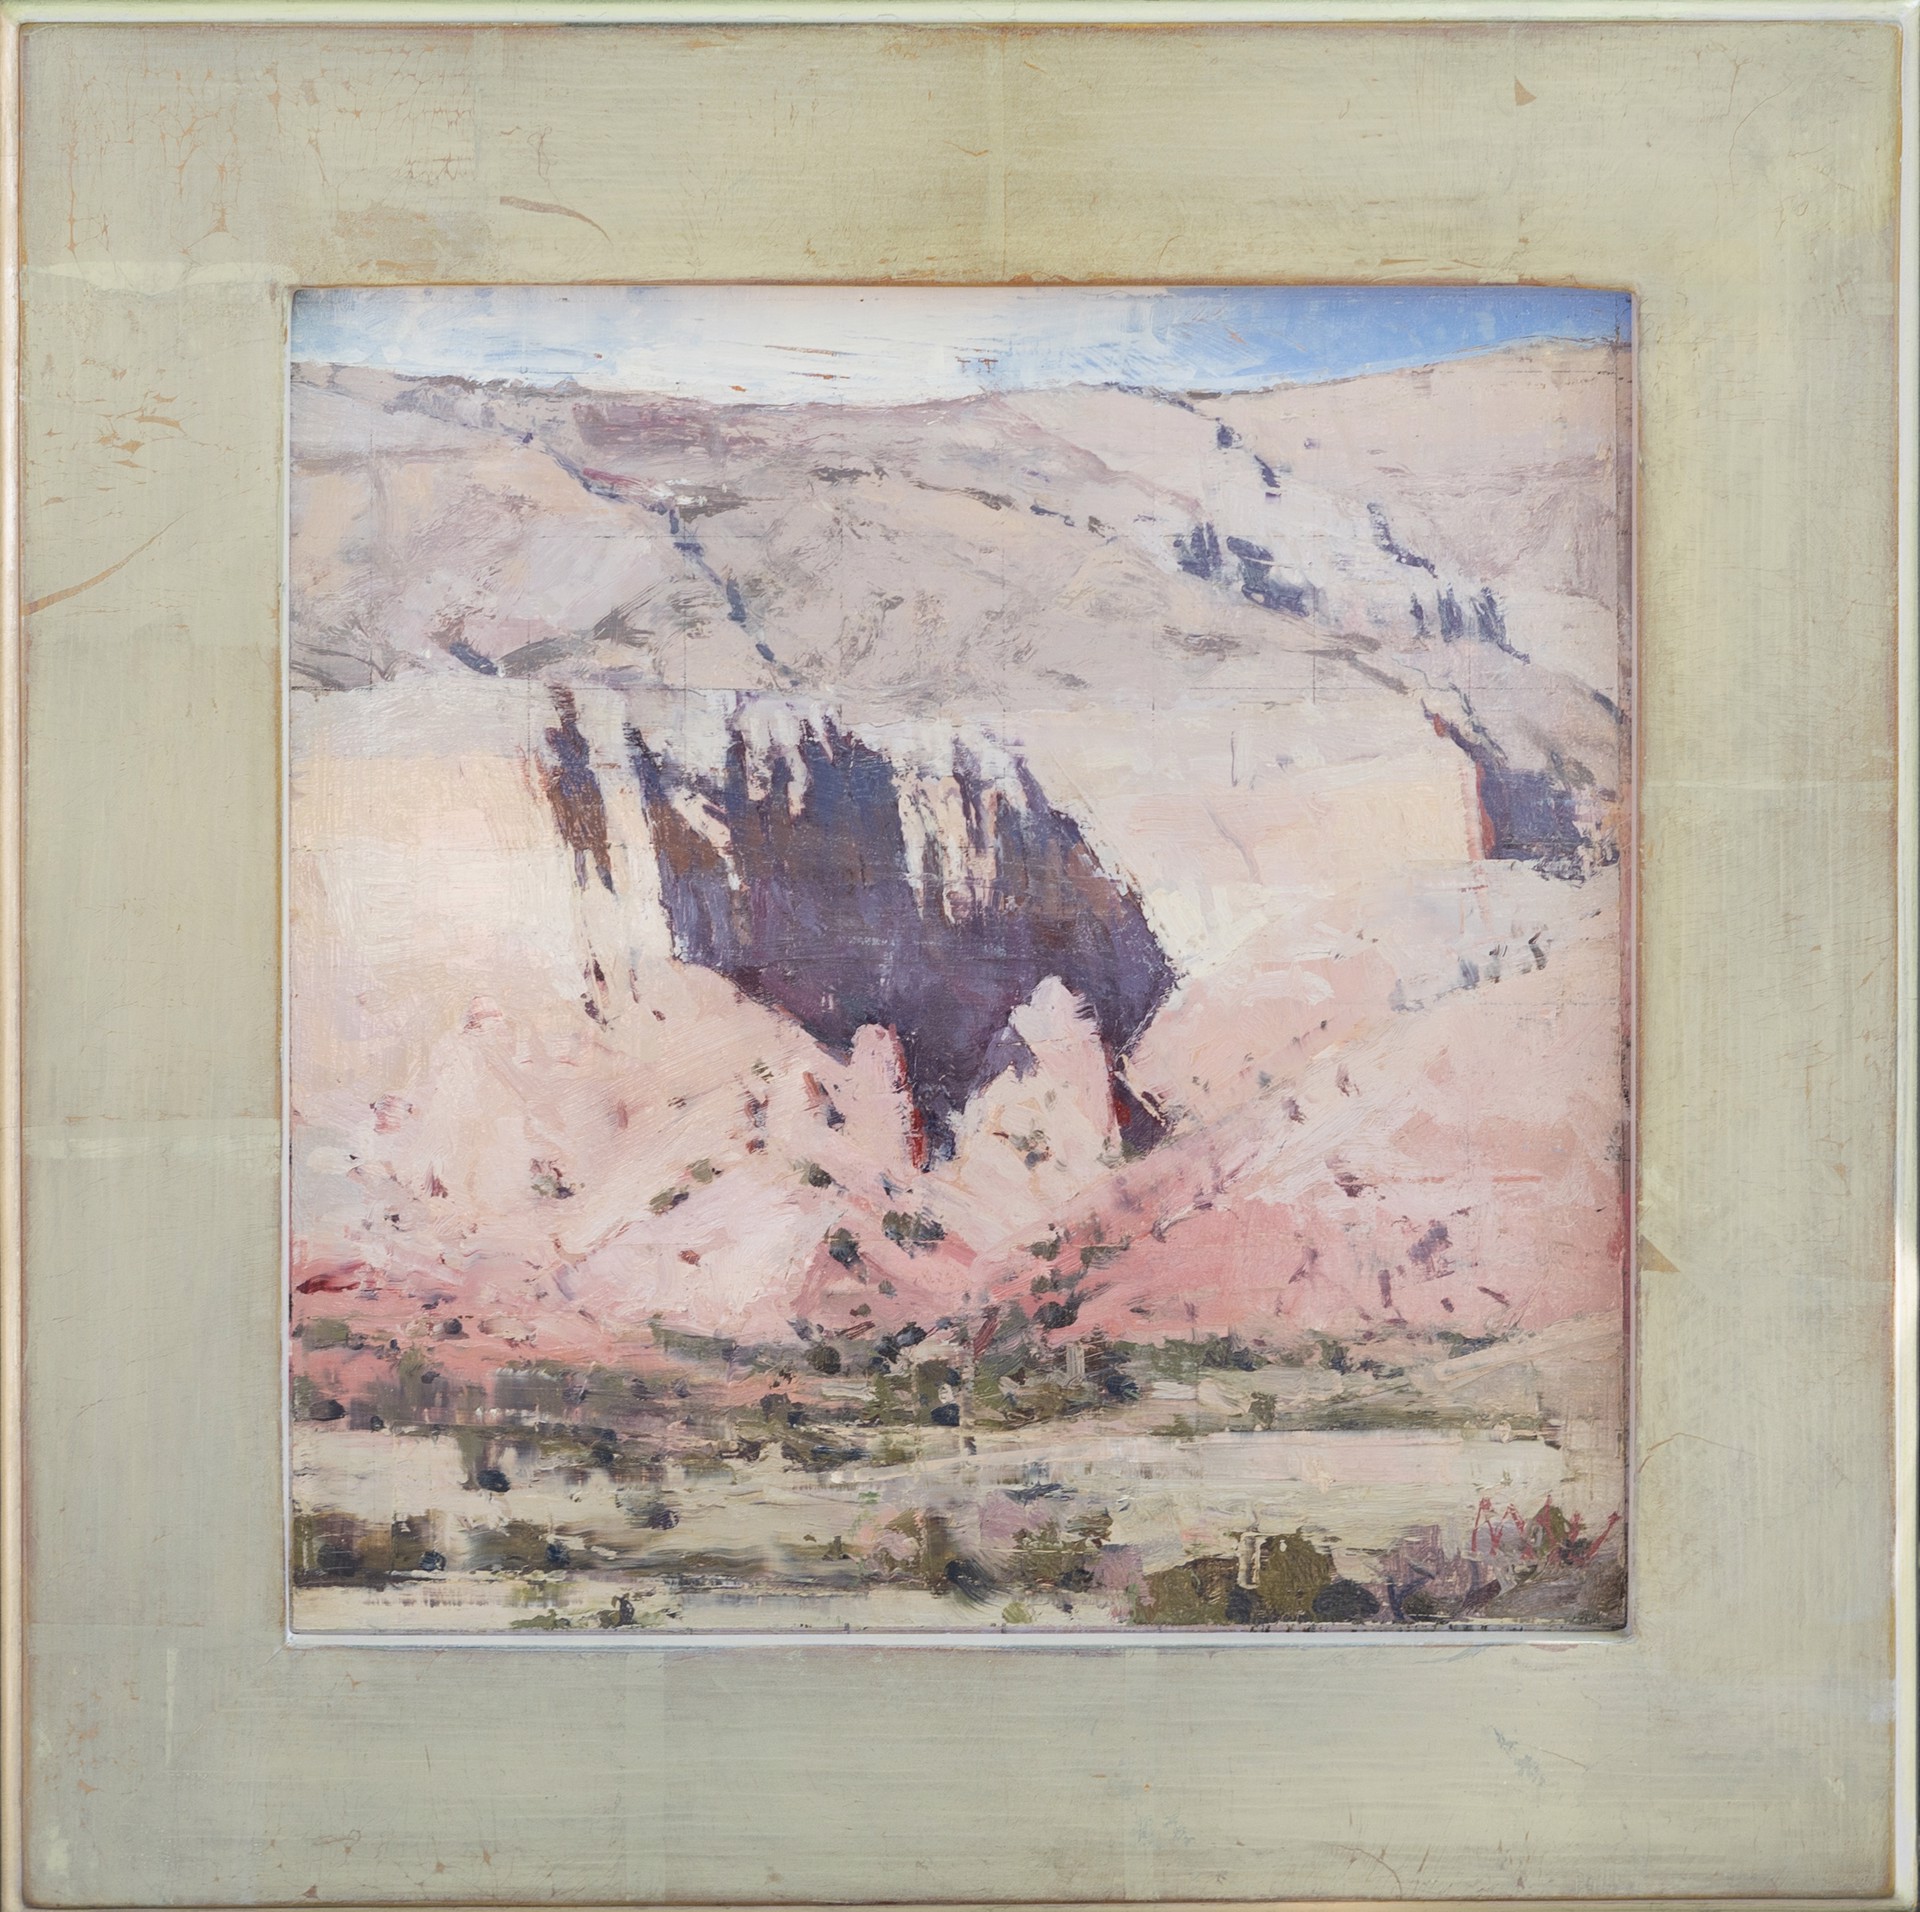 Ghost Ranch Sketch by Michael Workman